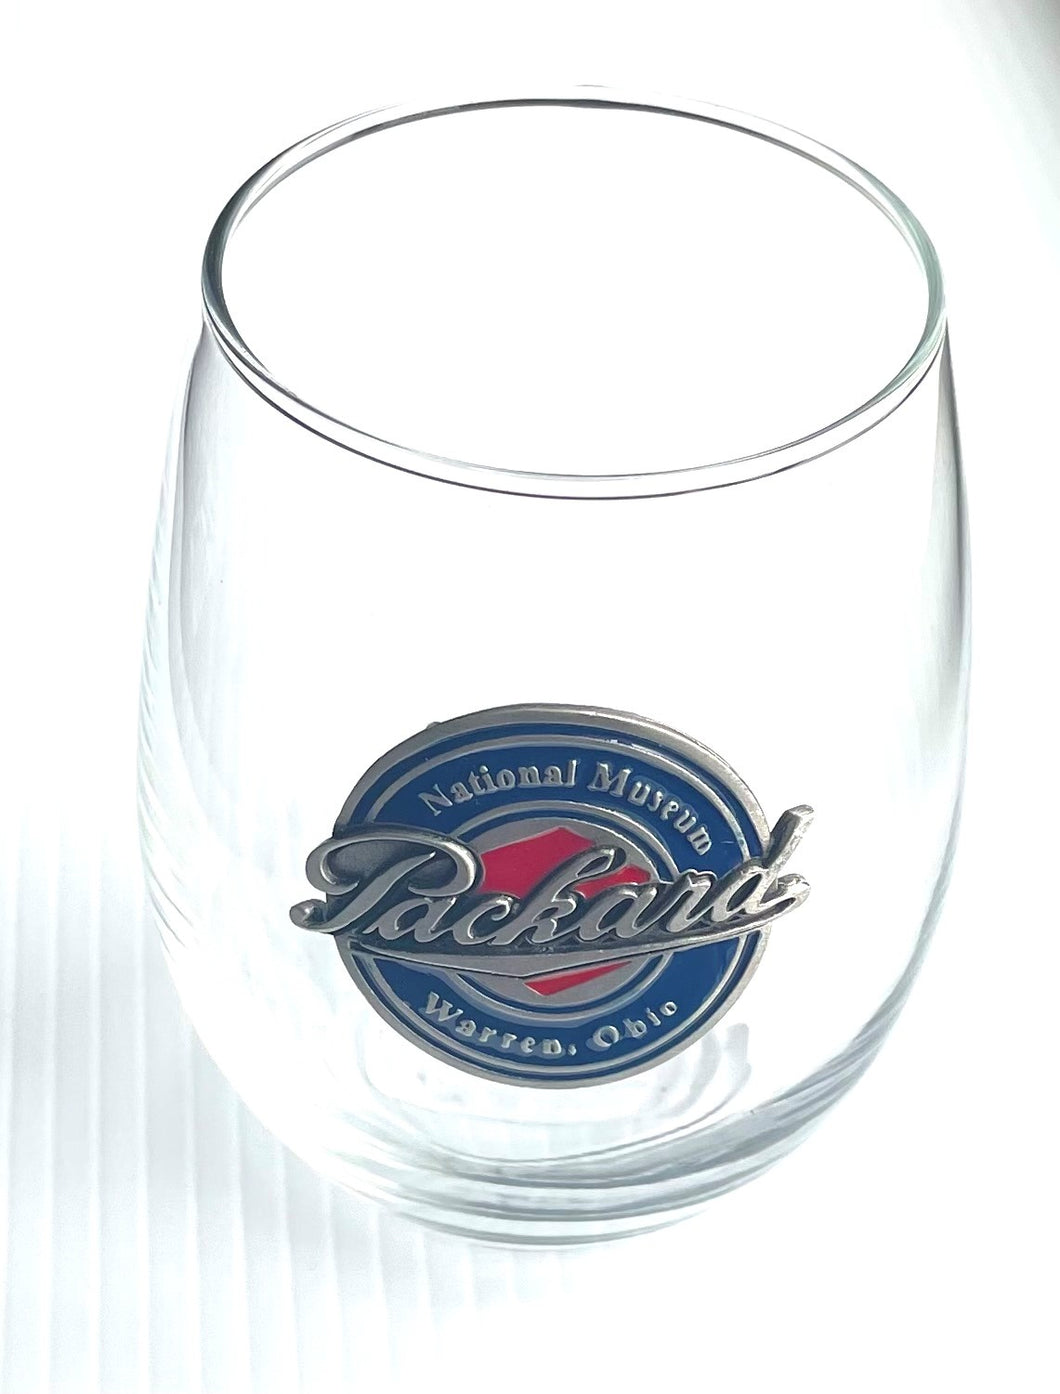 15 oz. Stemless Wine Glass with Pewter Crest $21.95